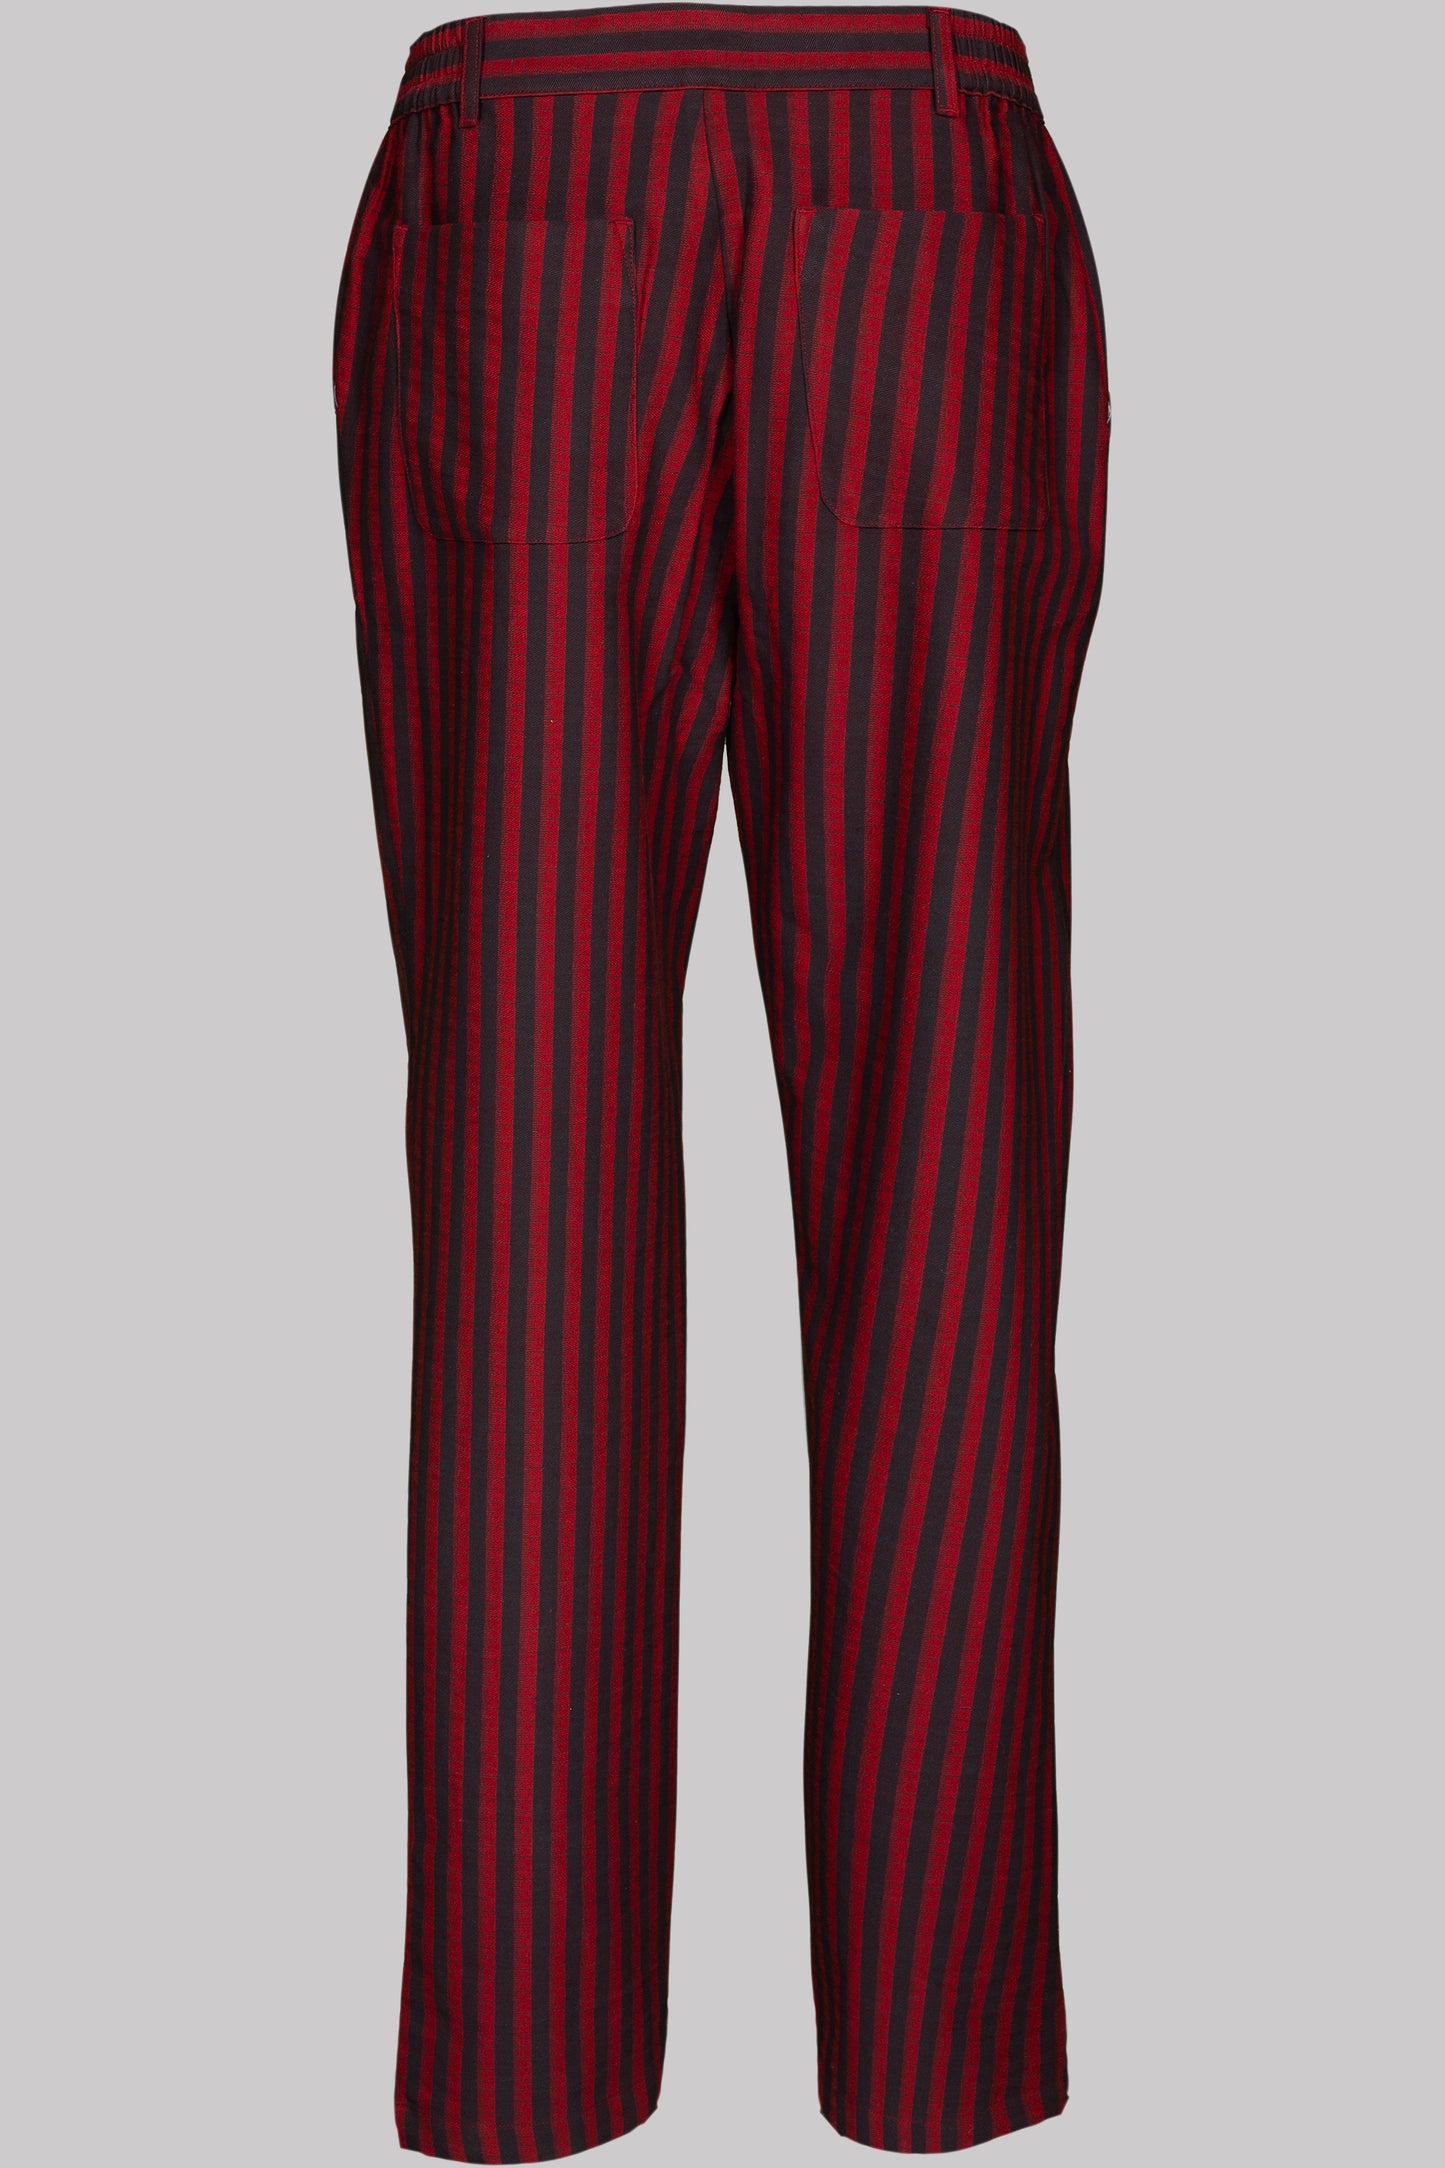 BUTTON-TROUSERS RED-Black 100% COTTON Herringbone-Thick, Brushed-inside Broad-Stripes screen-print